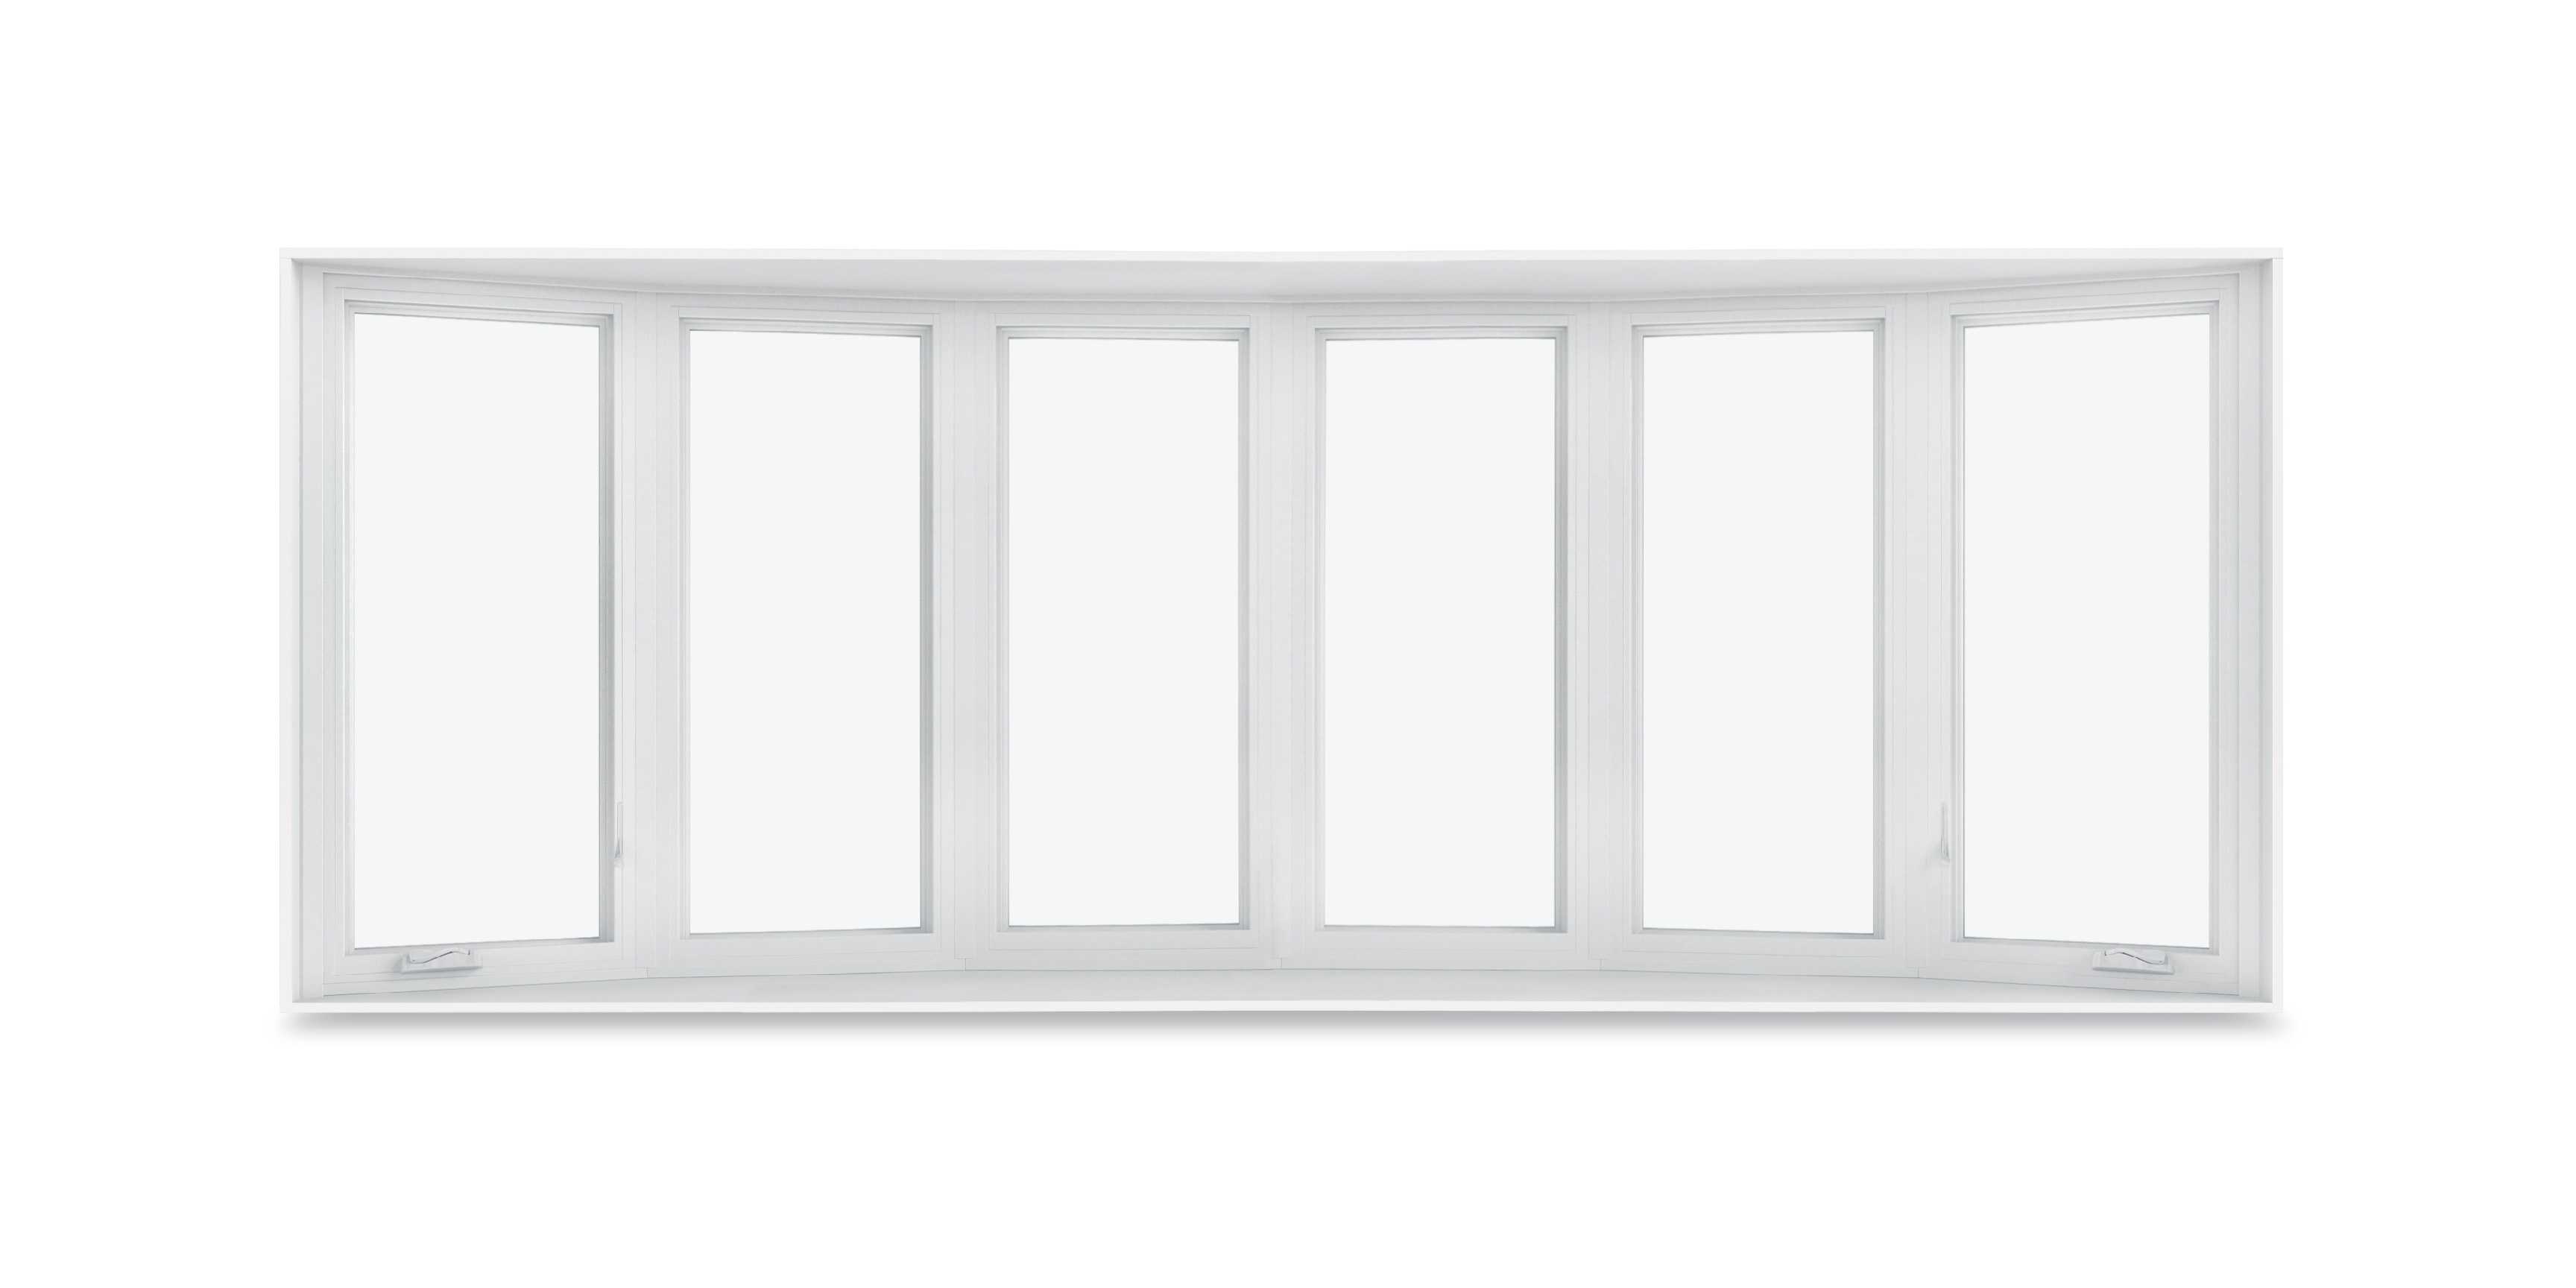 Image of a white six-wide Marvin Replacement Bow window with flanking Casement windows. 